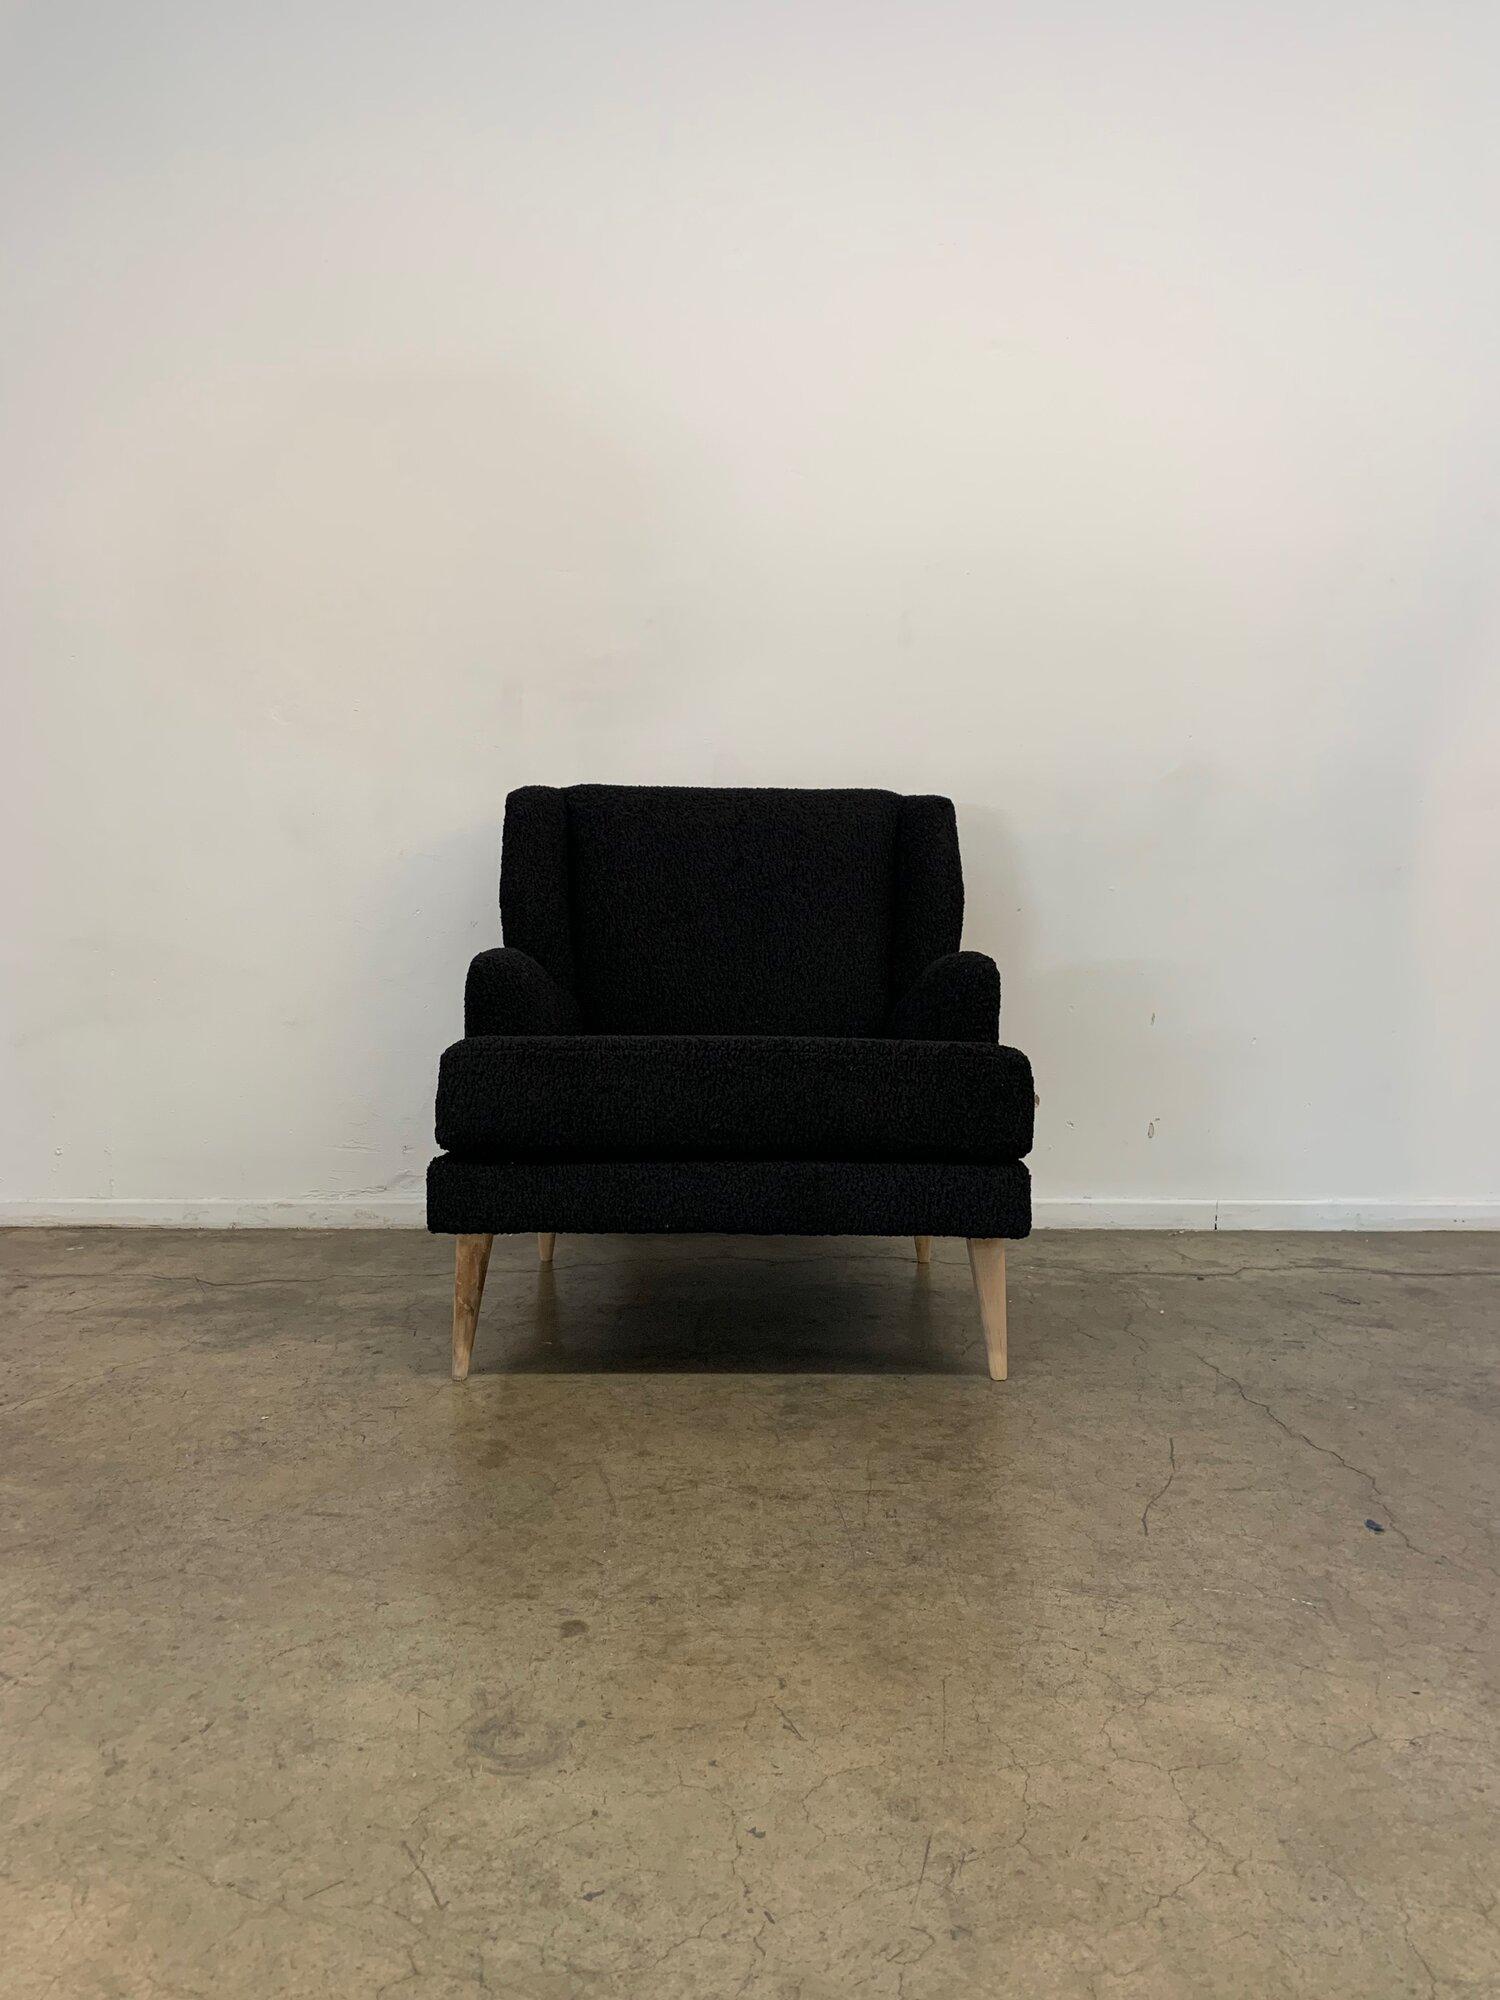 W31 D37 H33

SW21 SD22.5 SH17.5 AH7.5

Custom made, entirely in house all in black Sherpa with solid birch legs. The seat is wide with a reclined position. This piece is based on a vintage design by Paul McCobb 